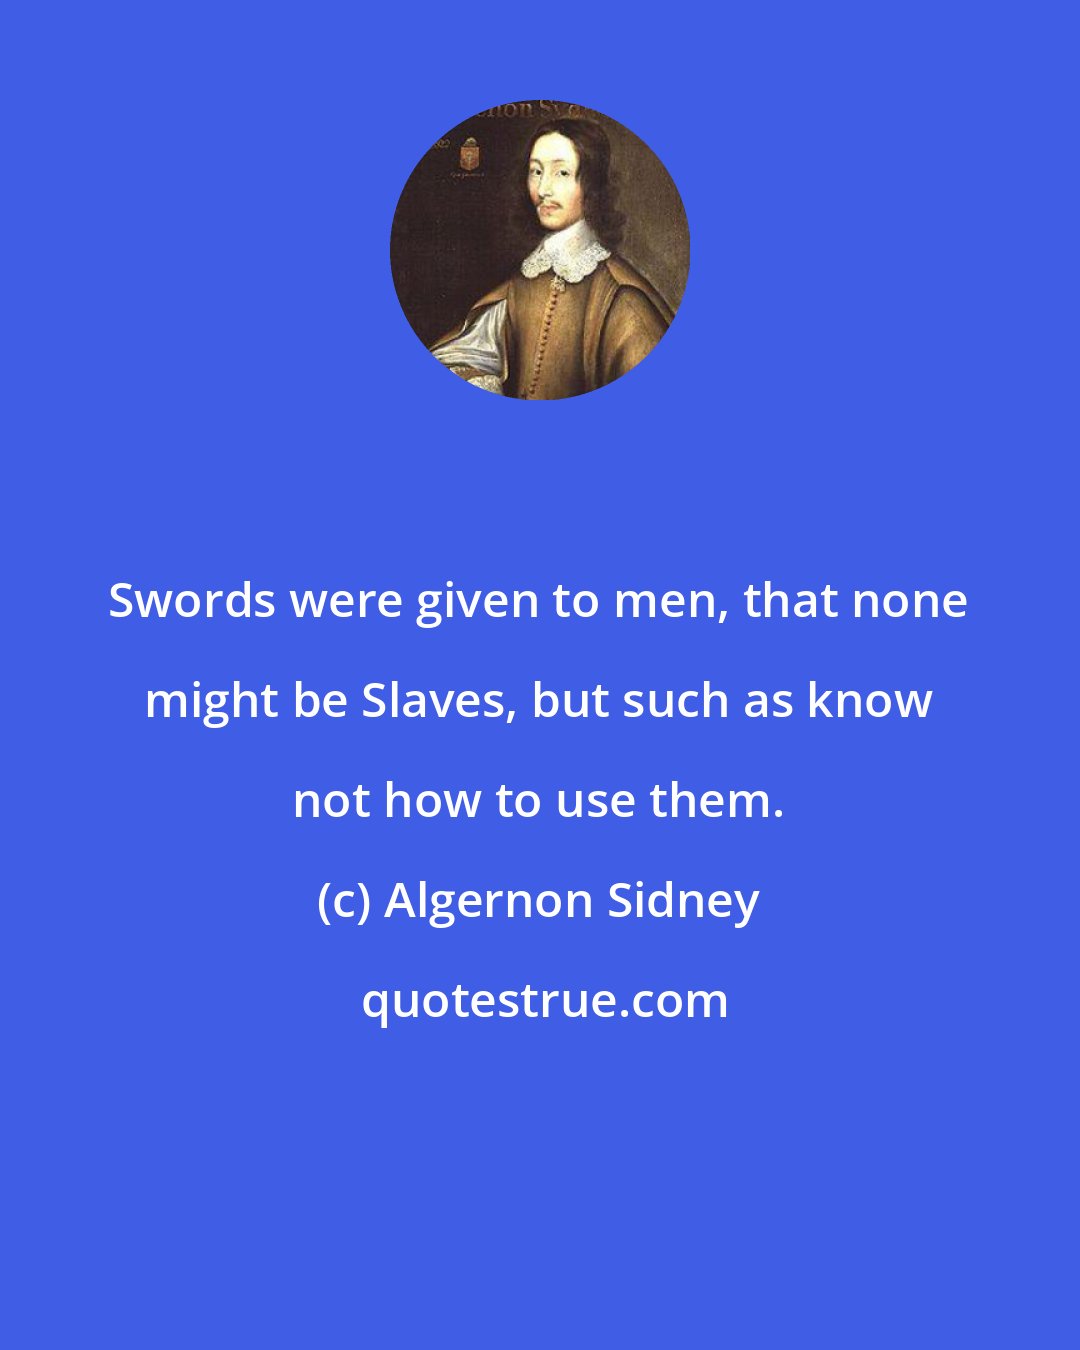 Algernon Sidney: Swords were given to men, that none might be Slaves, but such as know not how to use them.